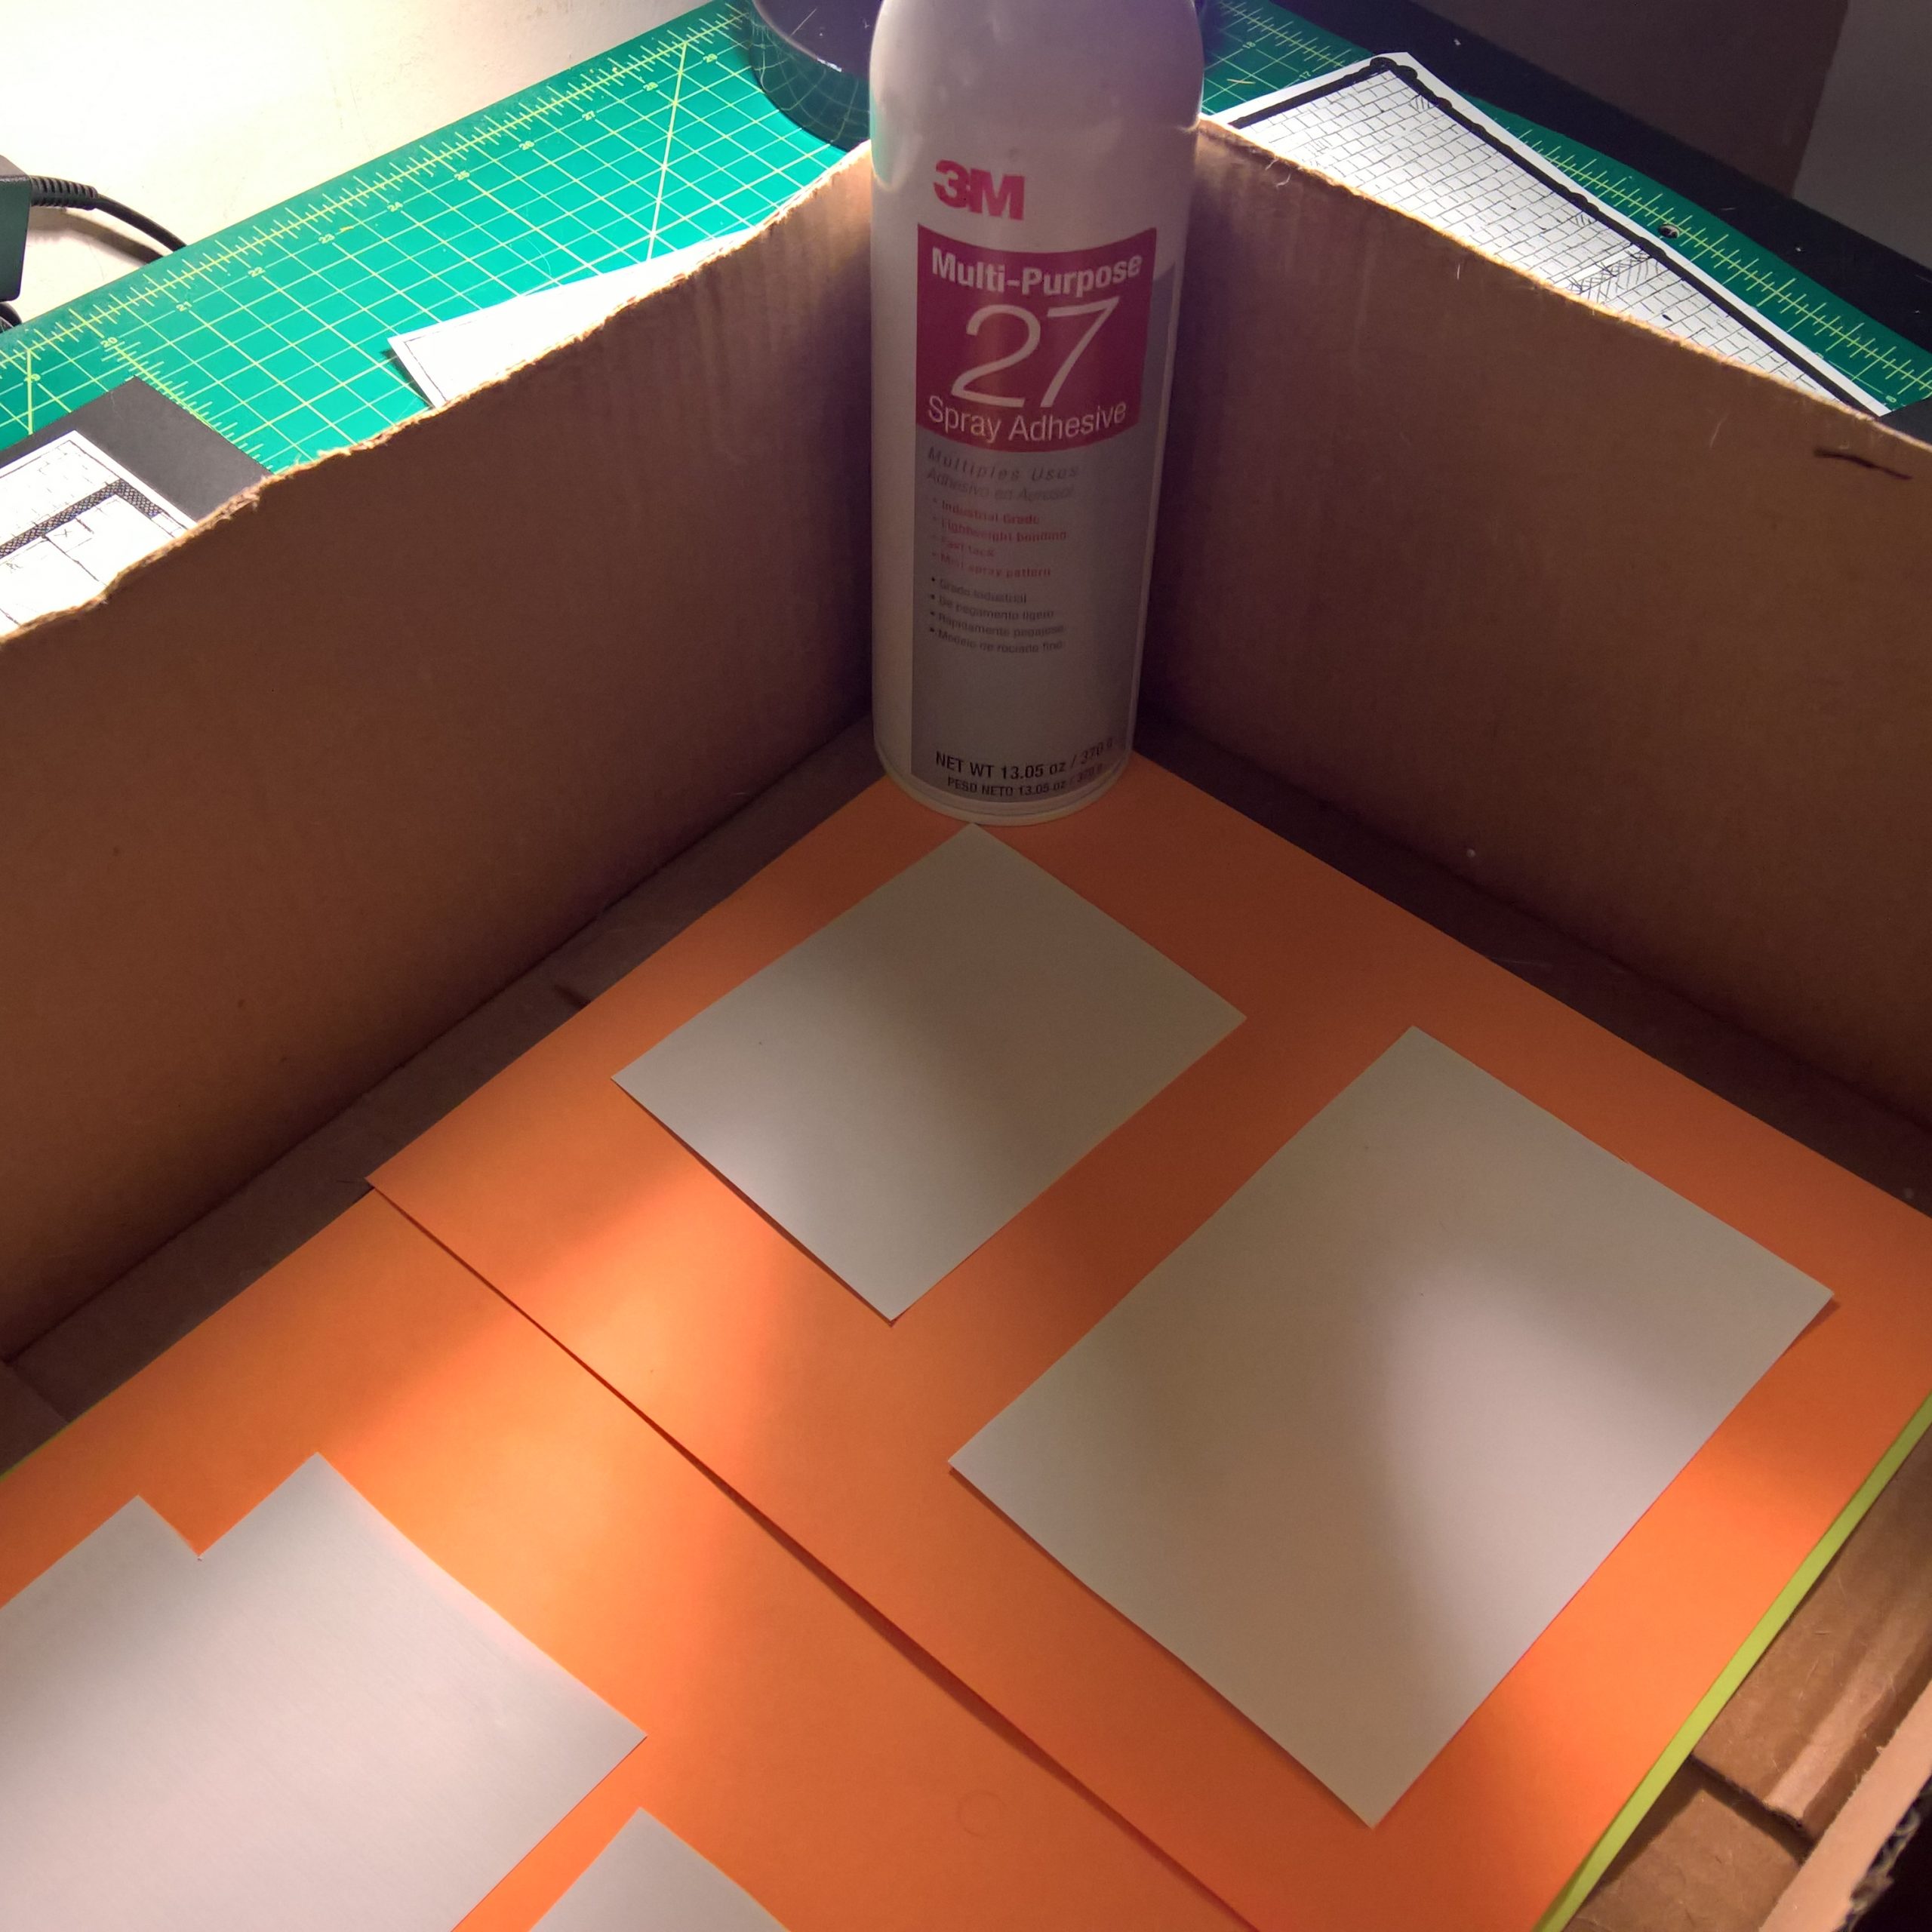 The cardboard box helps contain the spray. The photo was taken on my desk, but I highly recommend spraying somewhere else with goo ventilation to avoid mess.